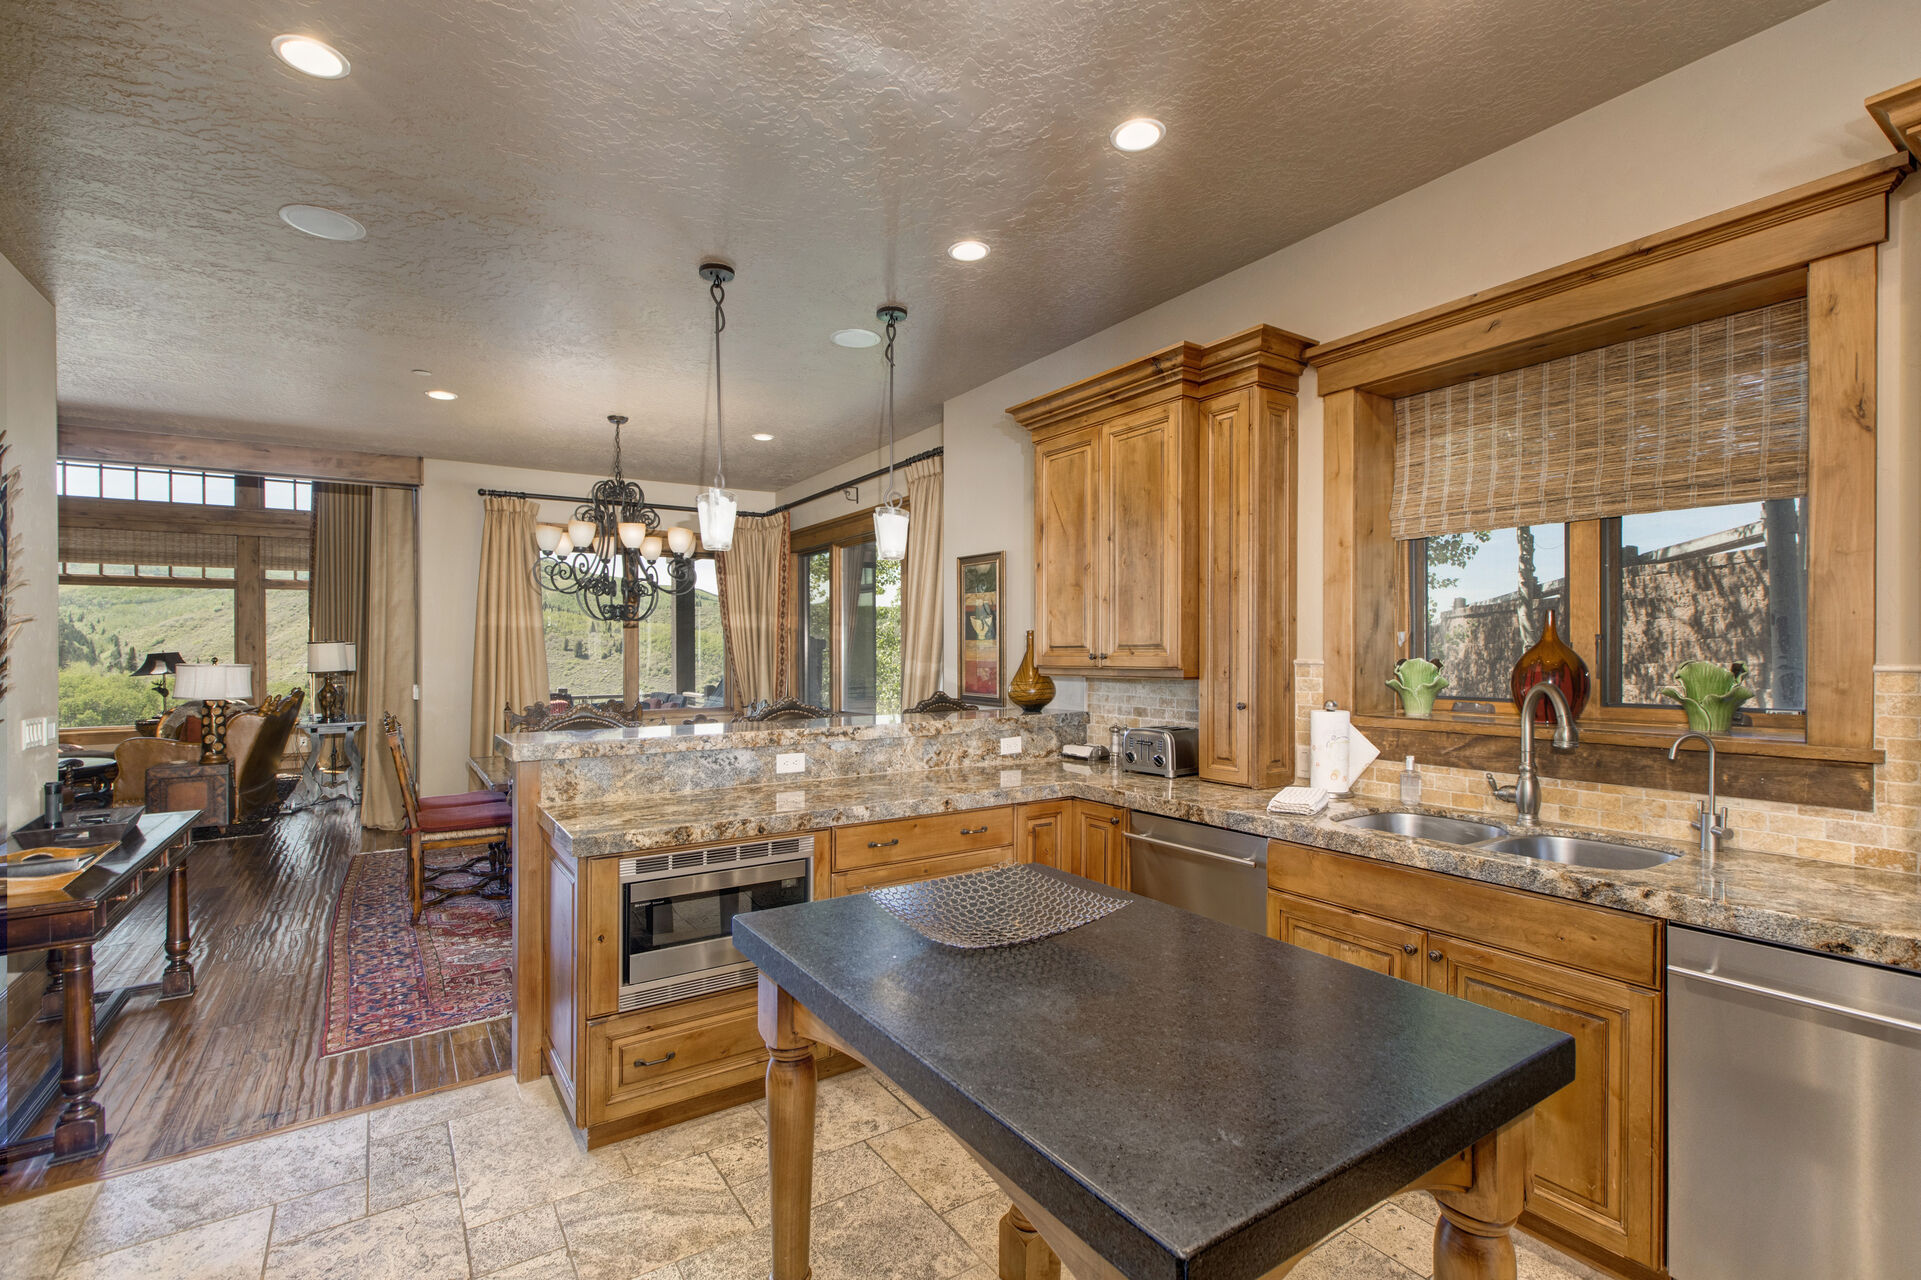 Kitchen with granite island, stone countertops, stainless steel appliances, Wolff stove, walk-in pantry, and bar seating for three